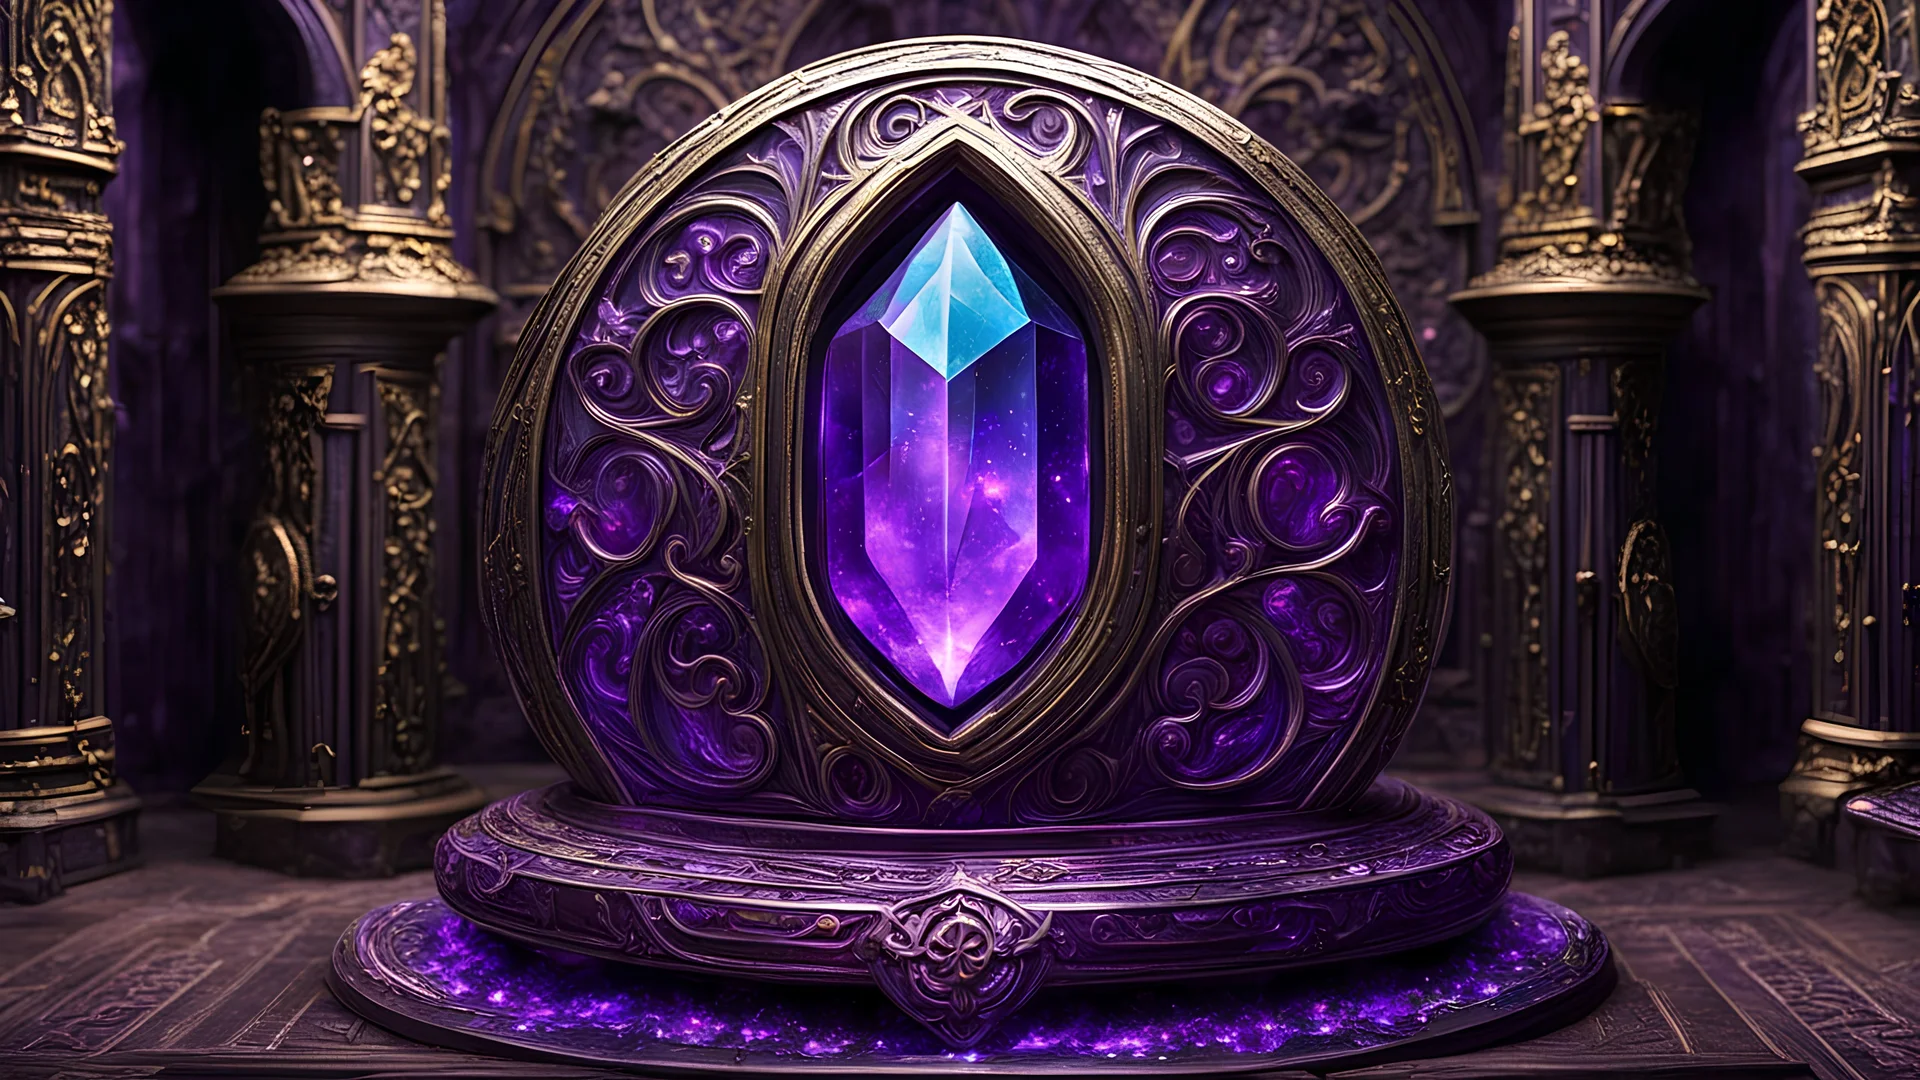 The motherstone: a bismuth like magical stone holy to the Kaïan violet wood elves. It is kept in a dark chamber with iridescent circuitry throughout the dark stone walls and floors. Dark and moody yet ethereal. Art Nouveau.